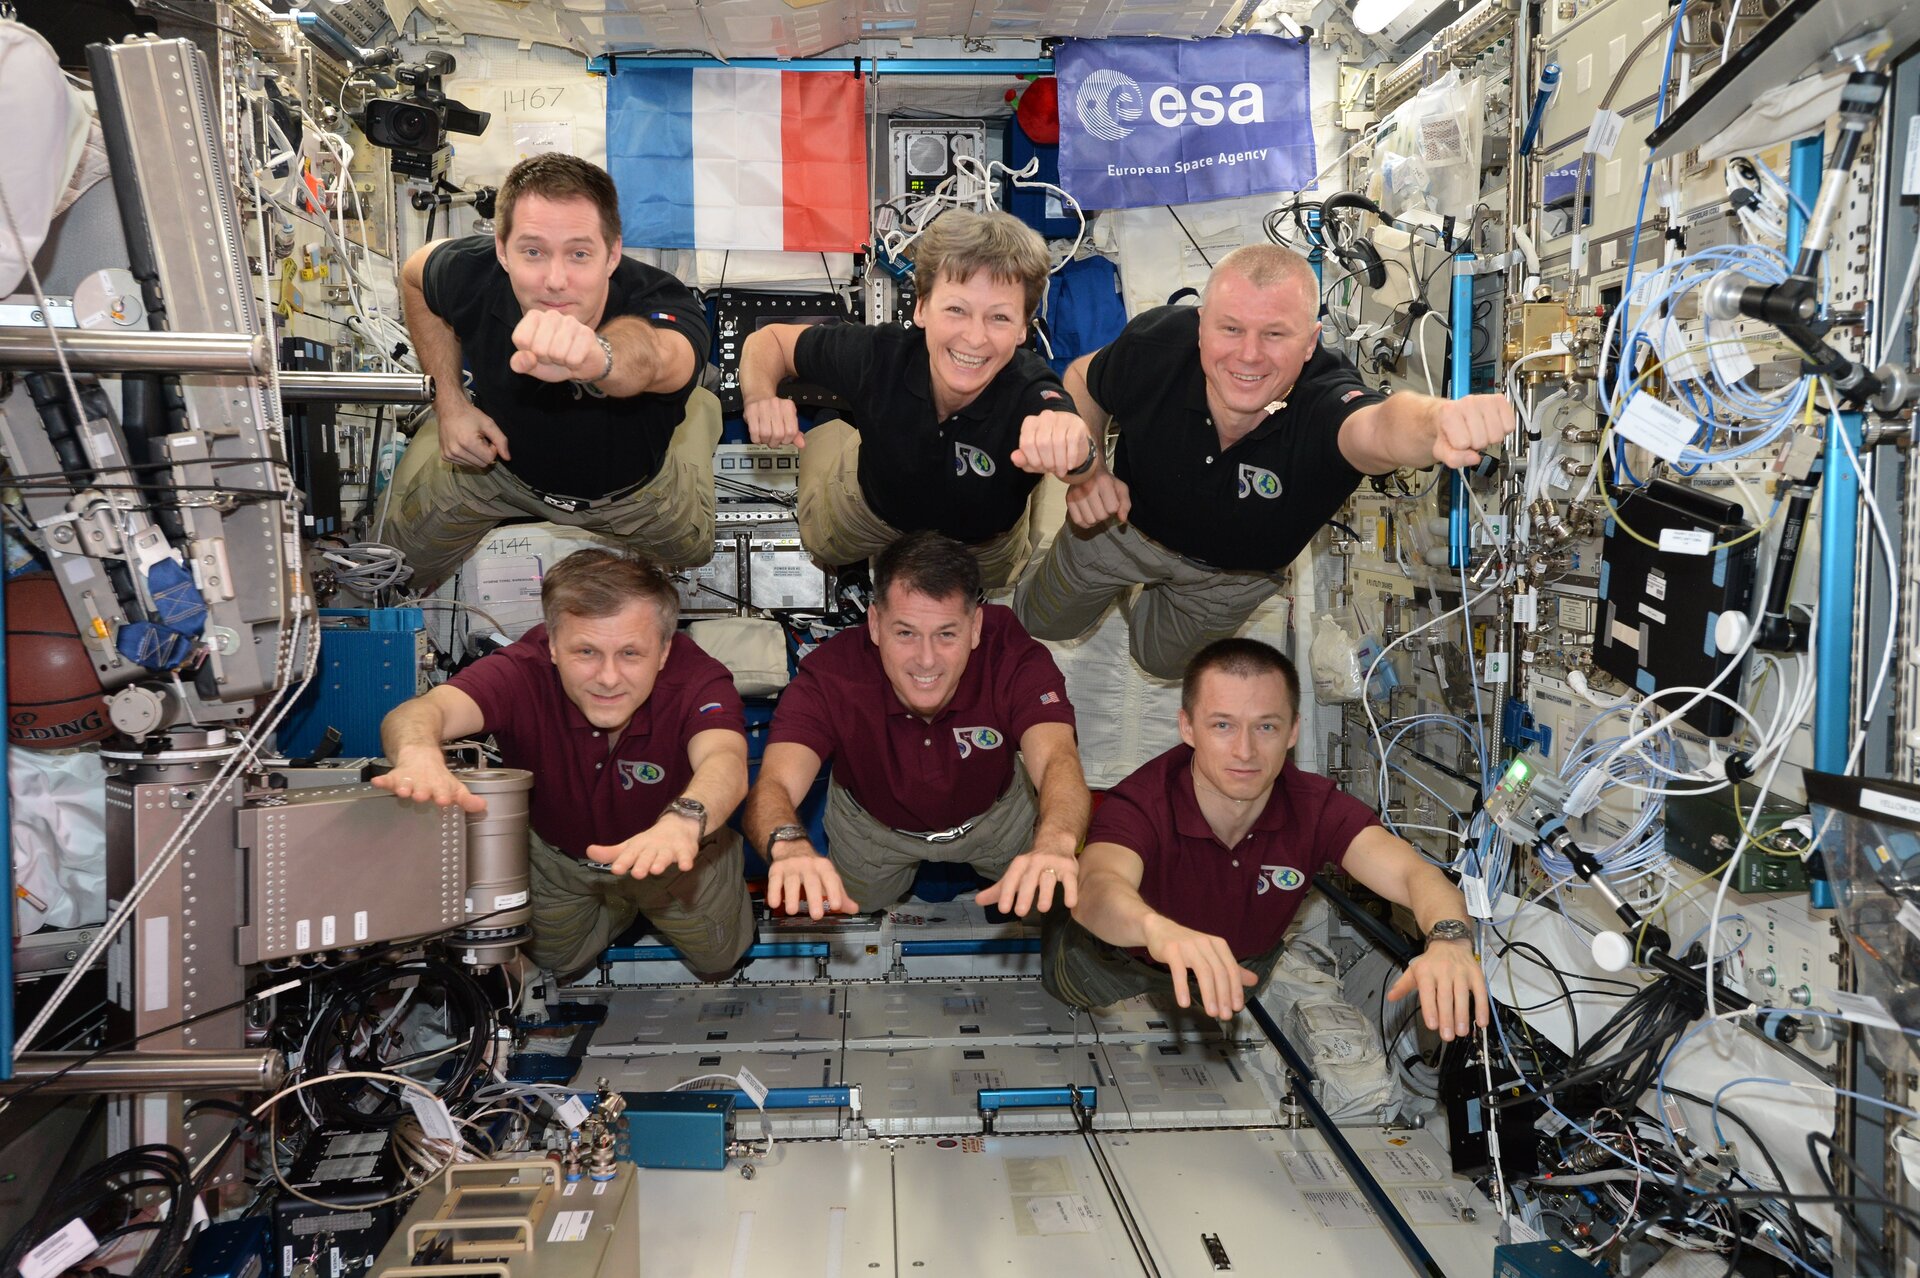 The record-breaking Expedition 50 crew